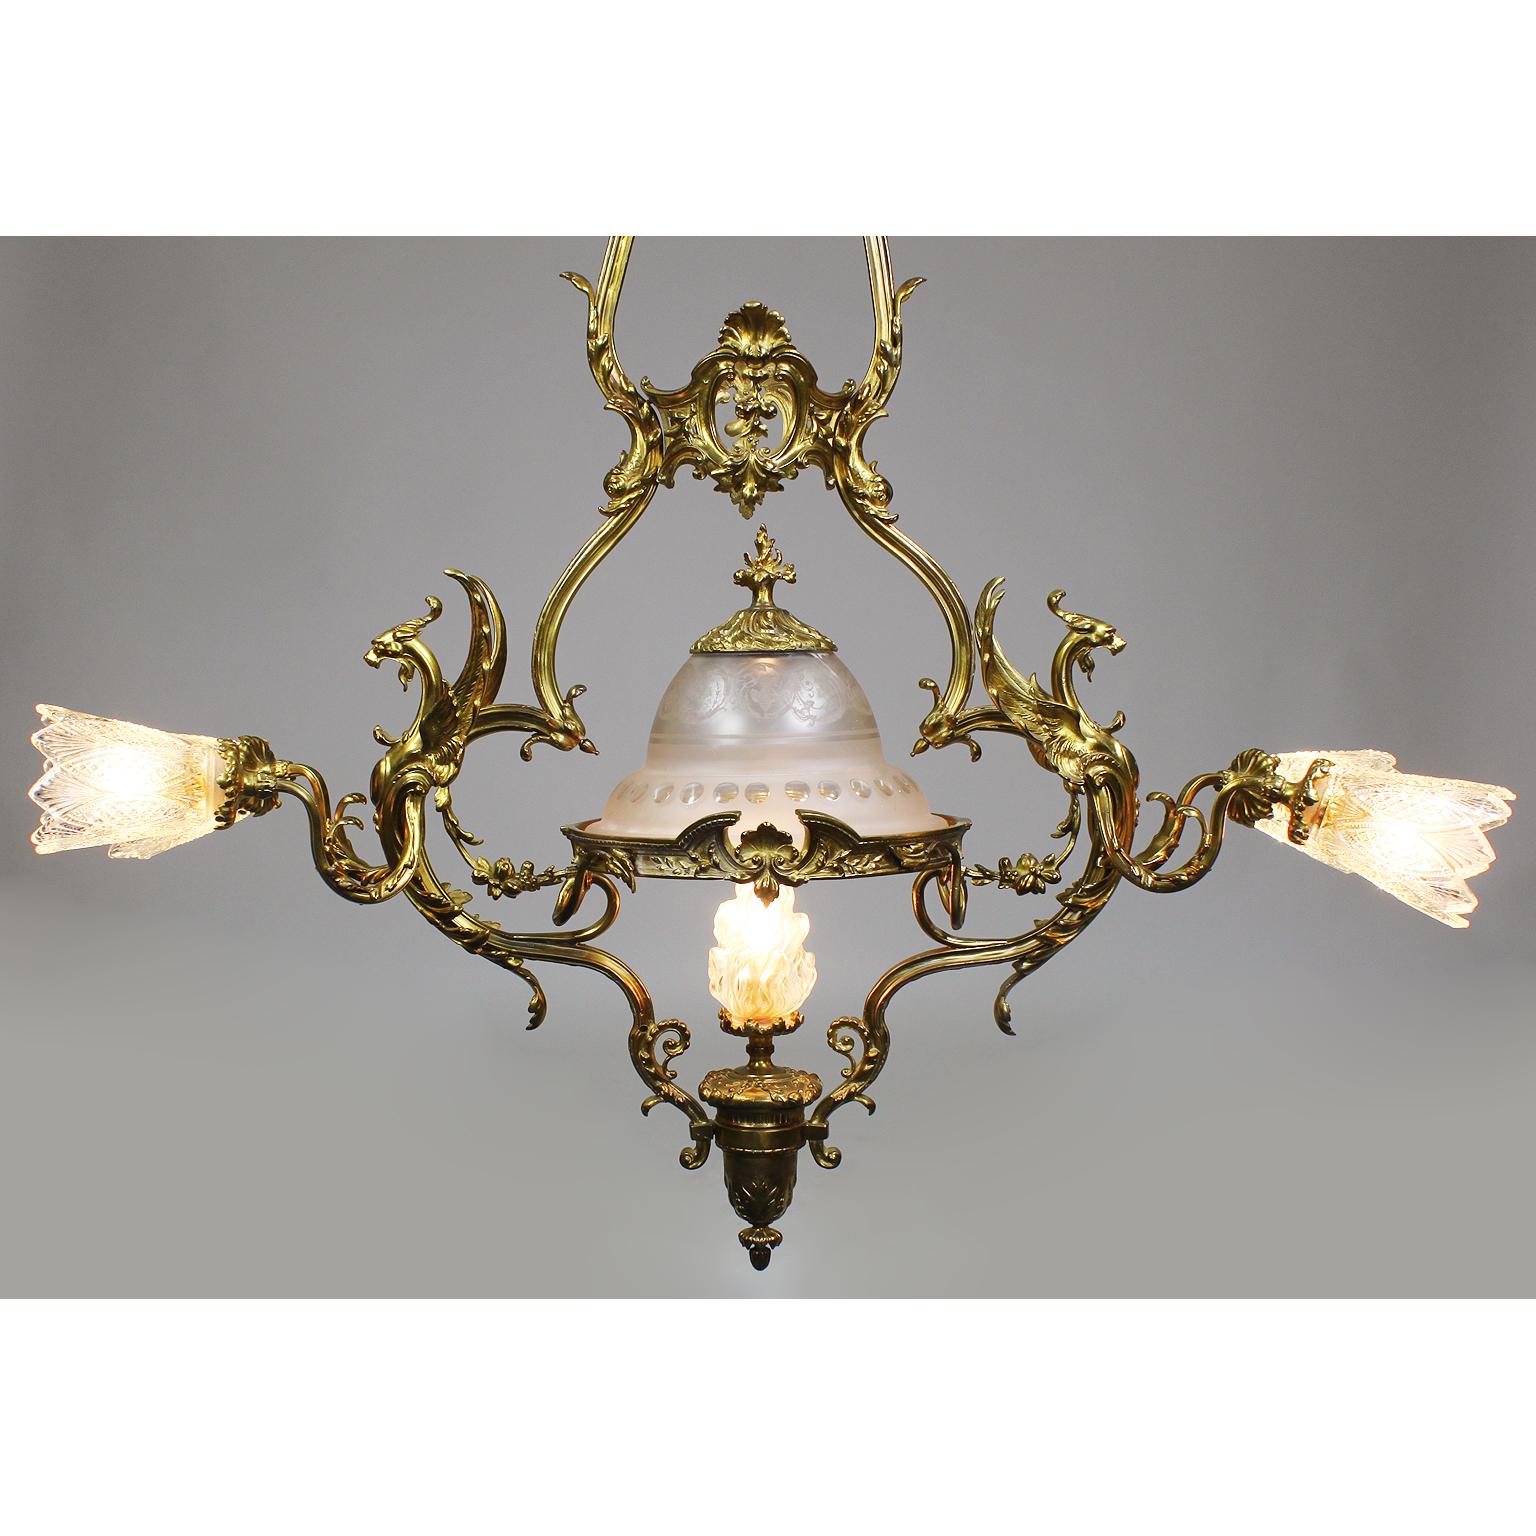 A fine and rare French belle époque early 20th century neoclassical Revival style gilt bronze and frosted cut-glass 